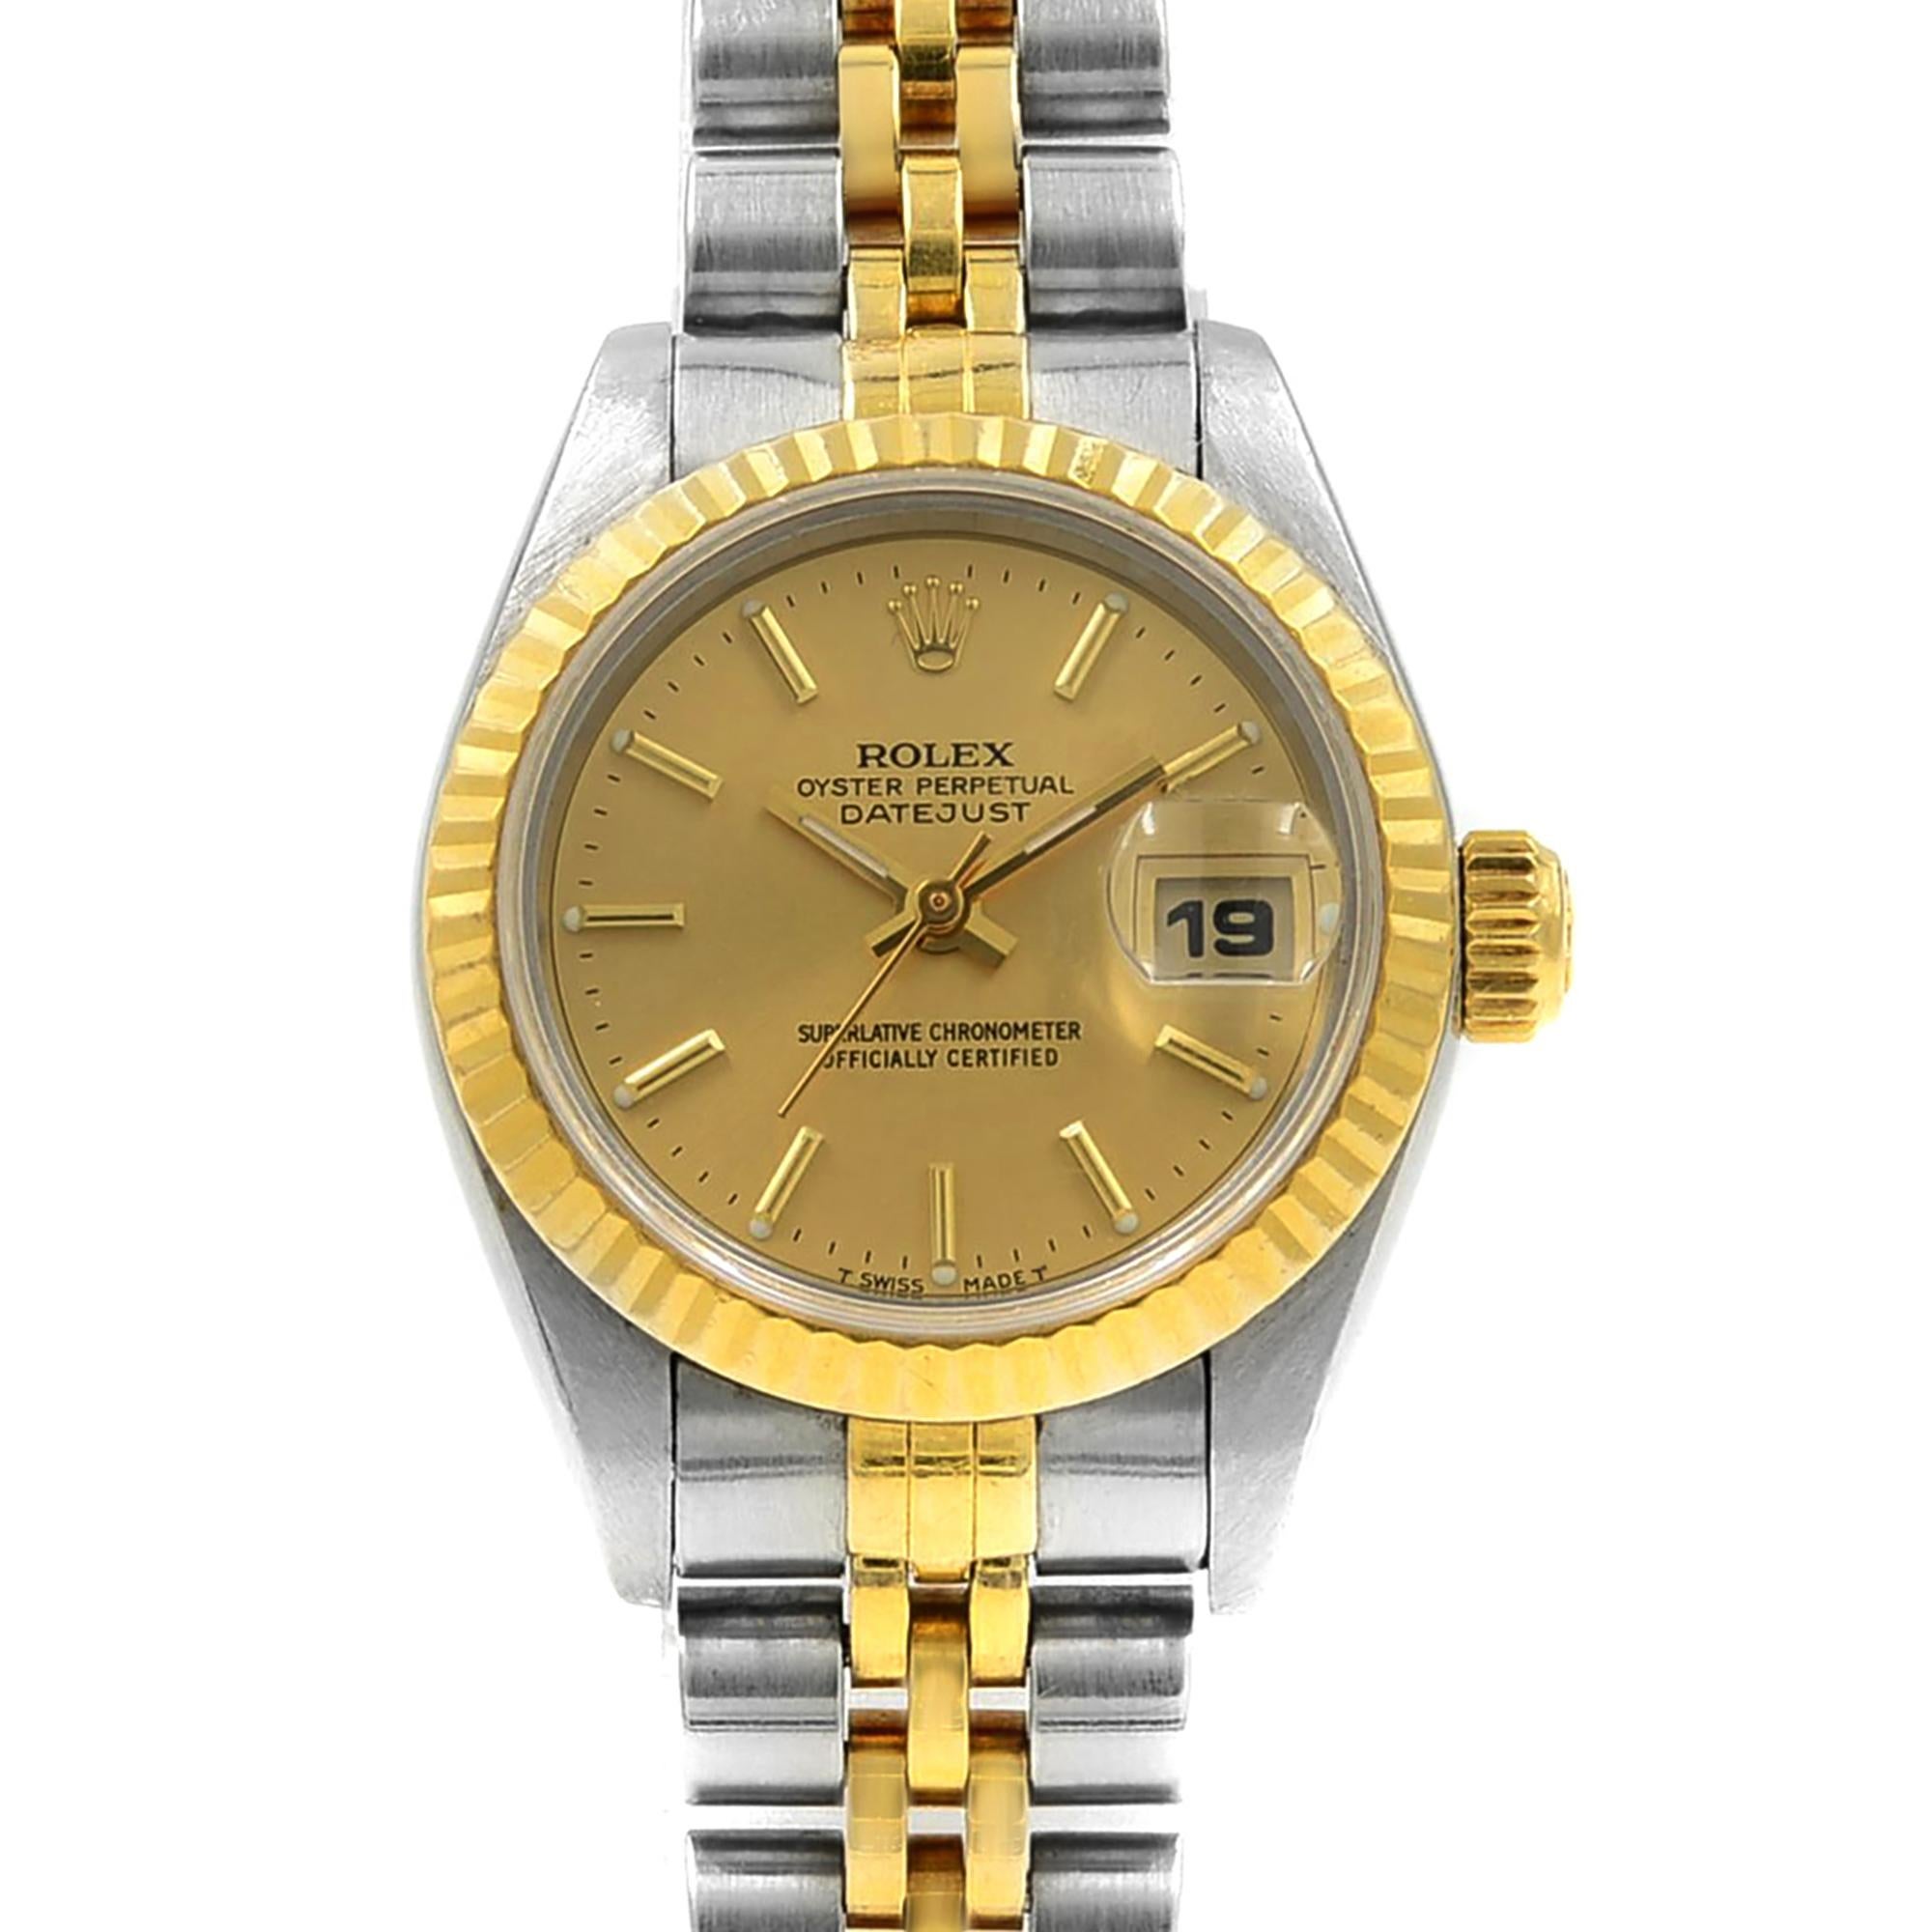 This pre-owned Rolex Datejust  69173  is a beautiful women's timepiece that is powered by an automatic movement which is cased in a stainless steel case. It has a round shape face, date dial, and has hand sticks style markers. It is completed with a